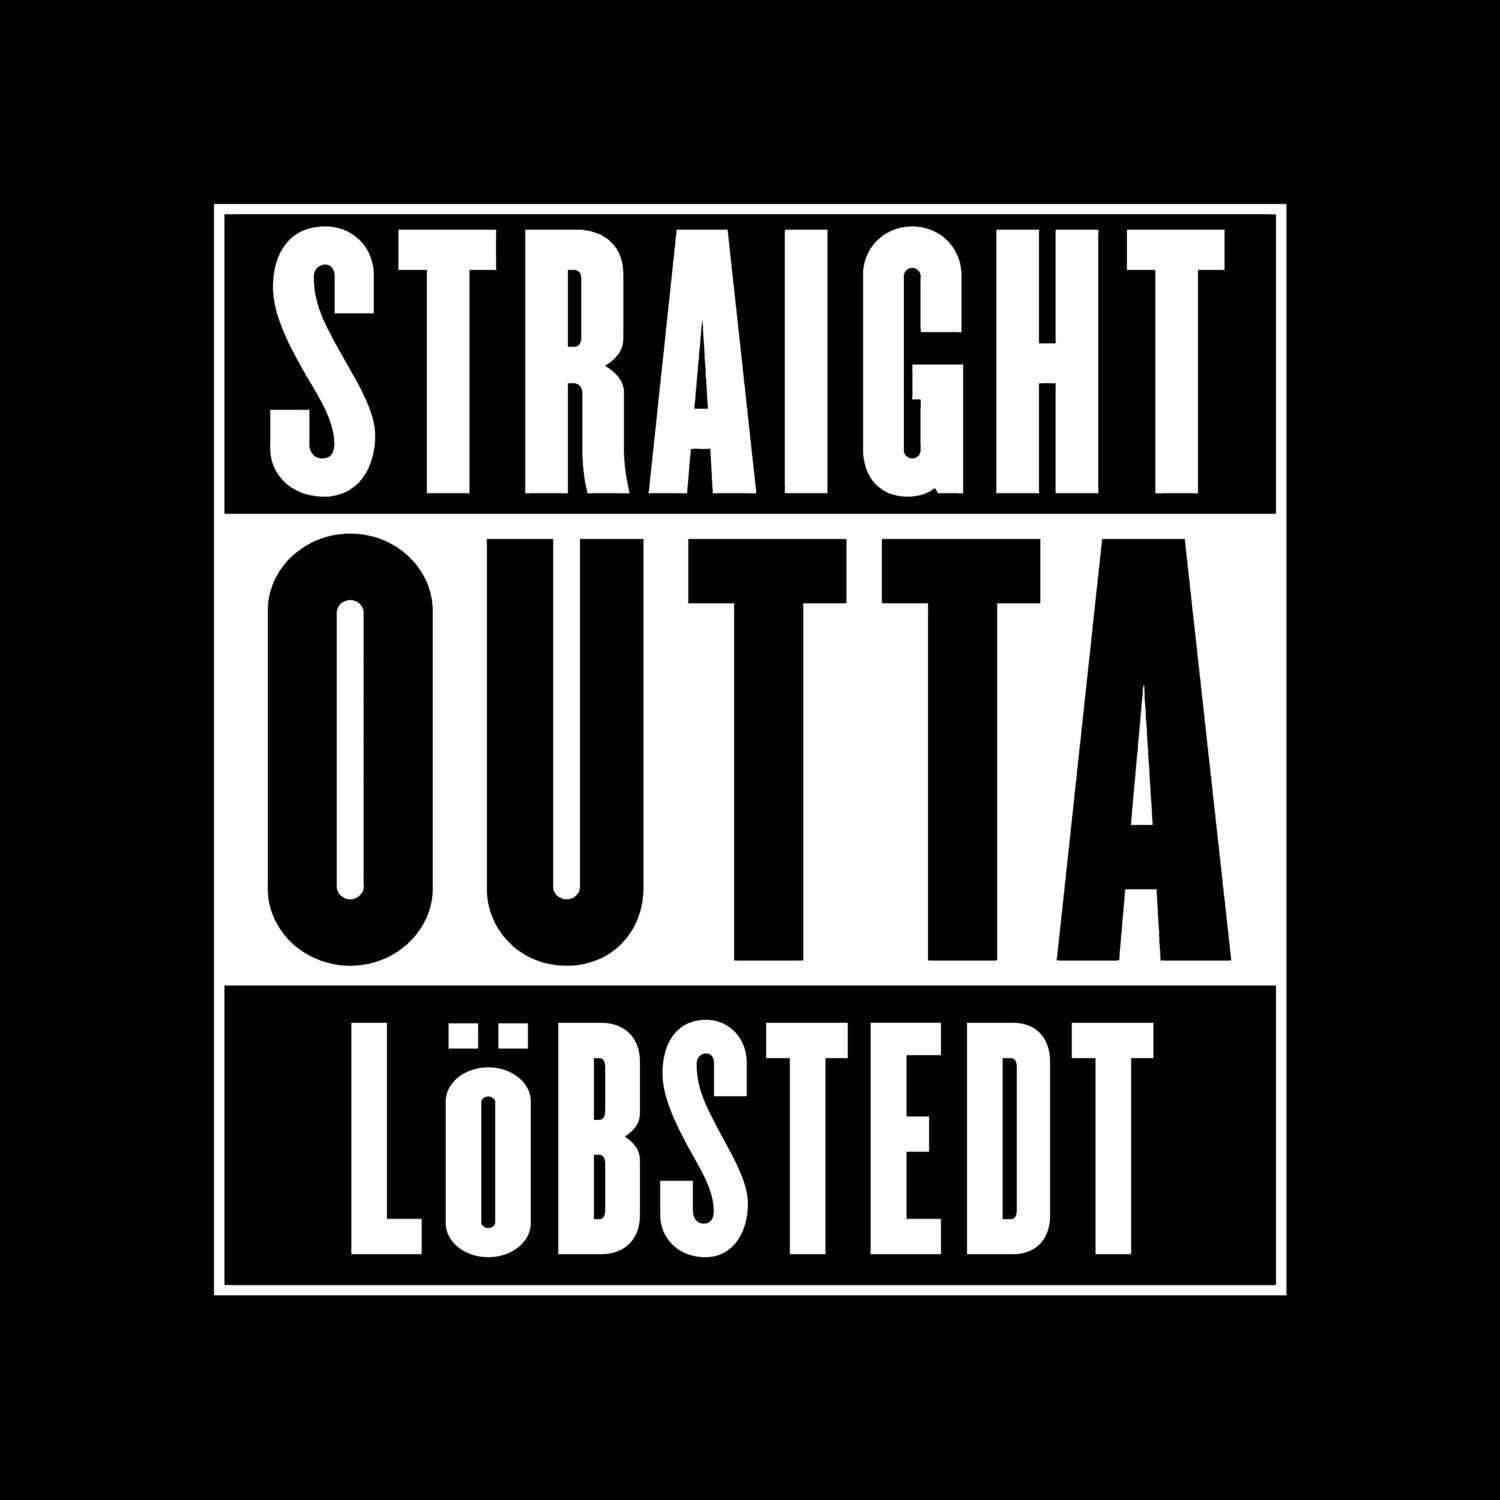 Löbstedt T-Shirt »Straight Outta«